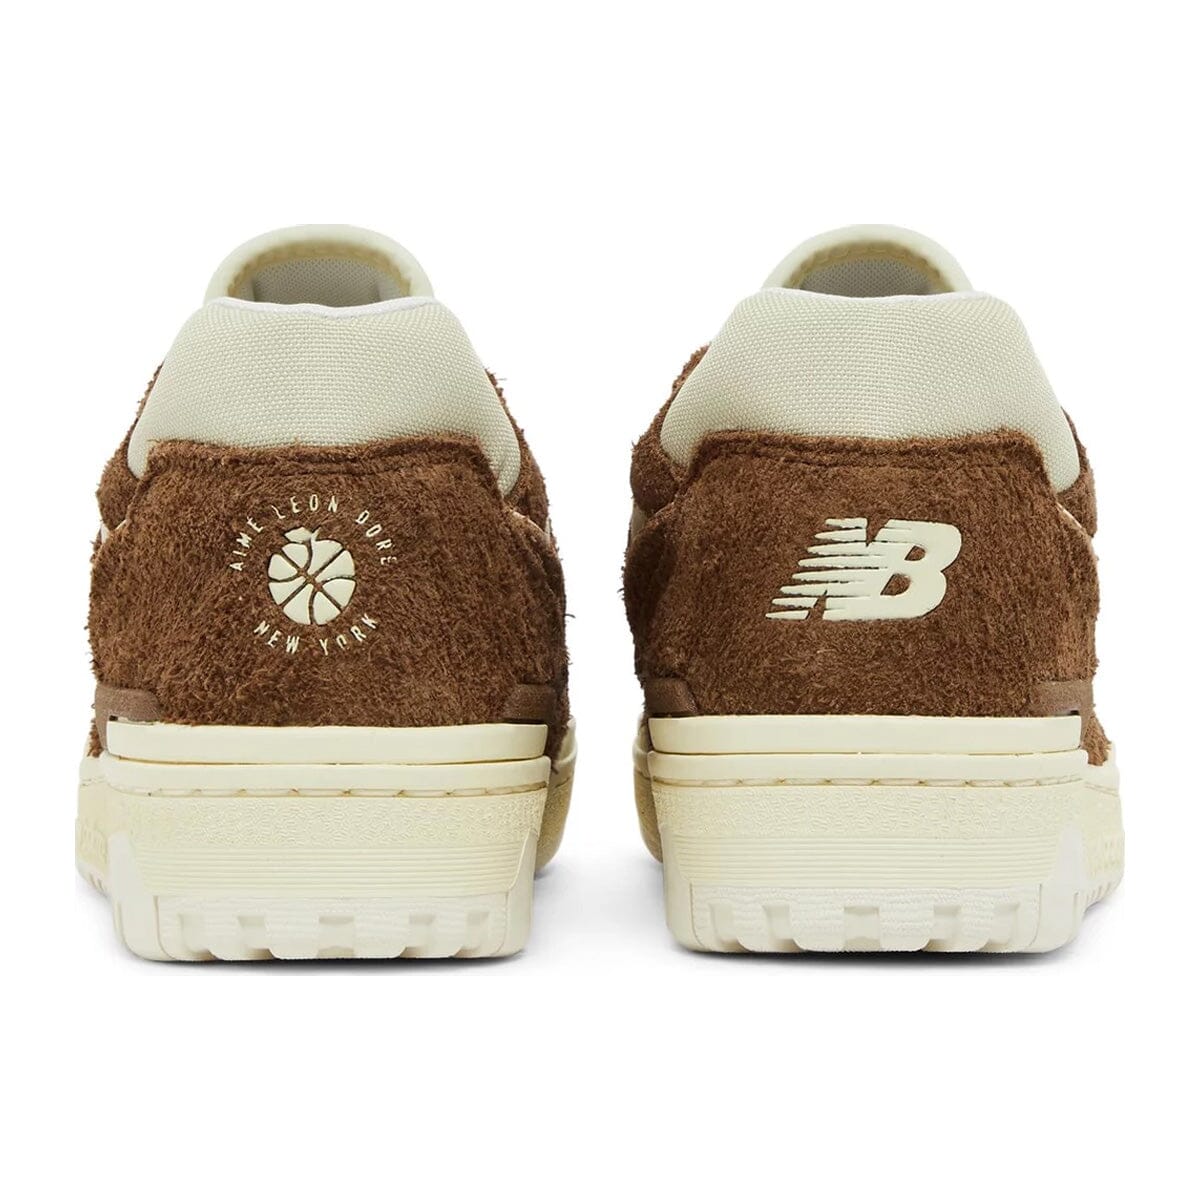 New Balance 550 Aime Leon Dore Brown Suede New Balance 550 Blizz Sneakers 